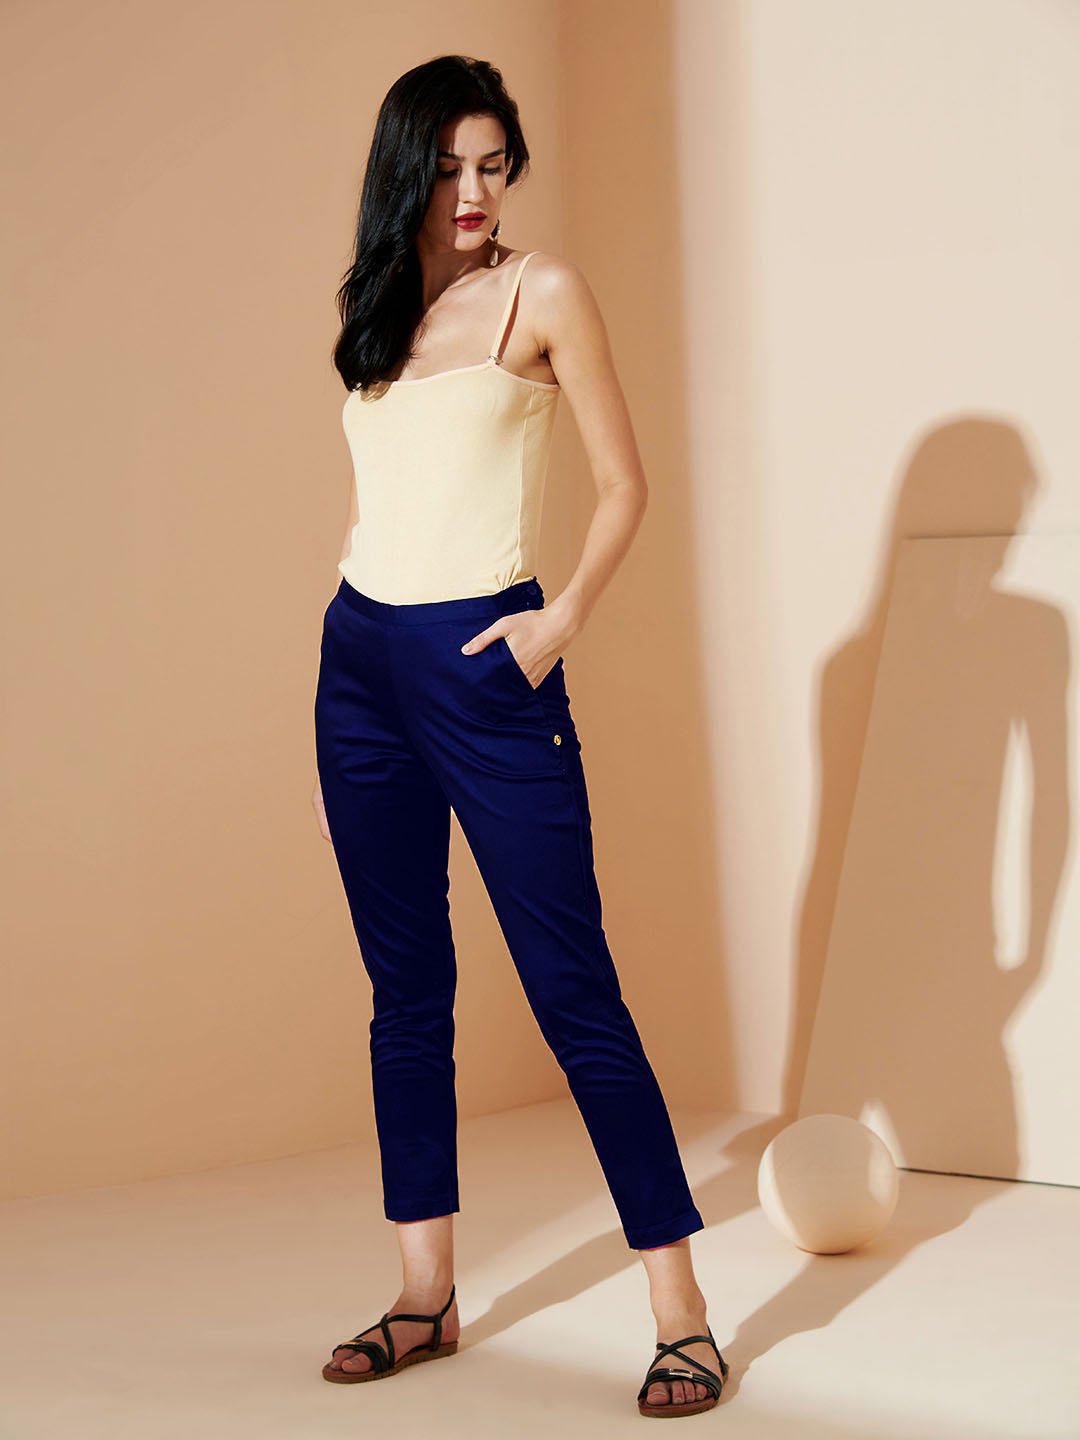 2 Colorful Ways to Wear Navy Blue Pants  Savvy Southern Chic